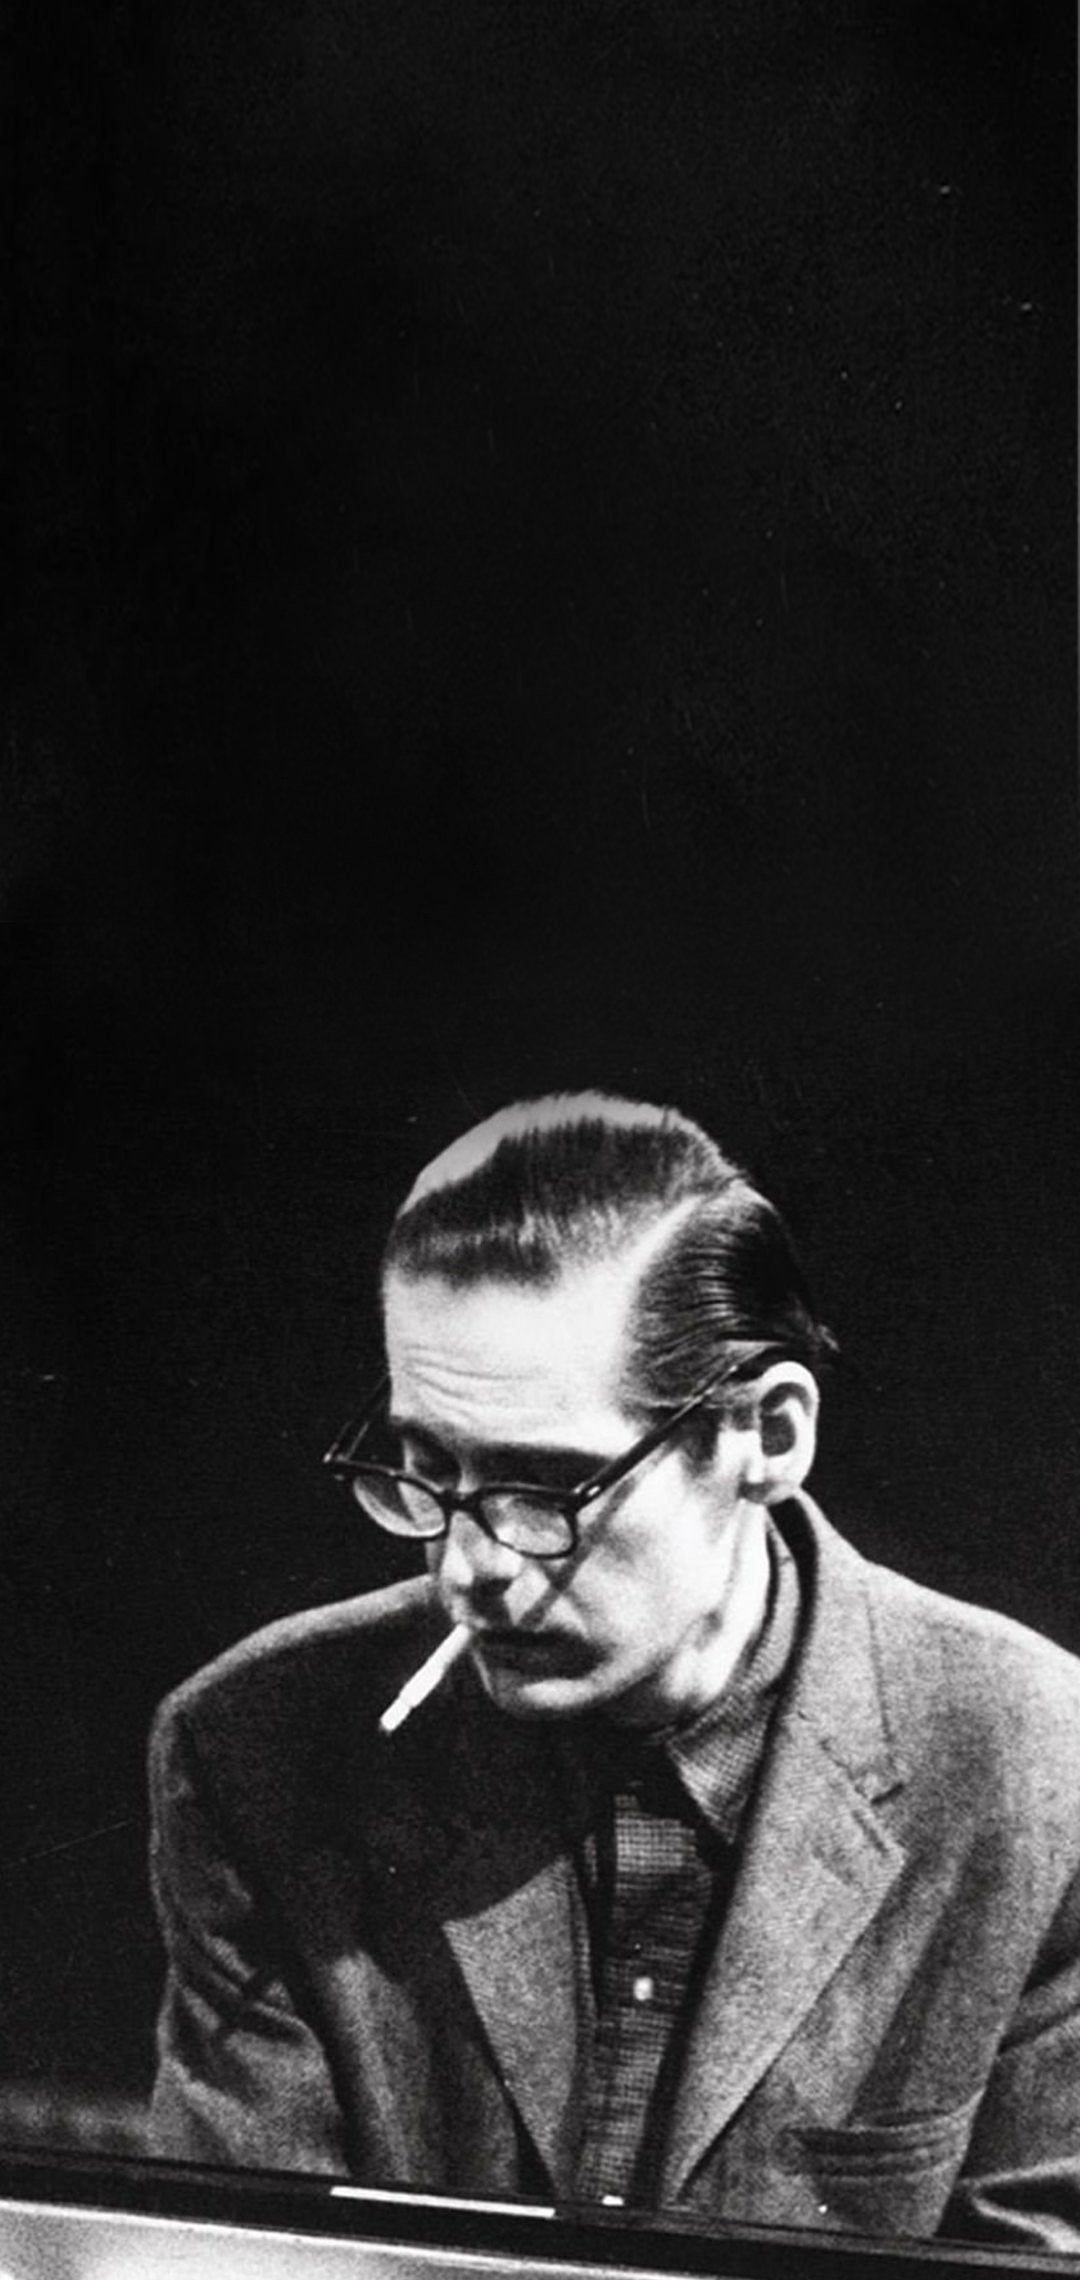 I turned this snazzy pic of Bill Evans into a mobile wallpaper i